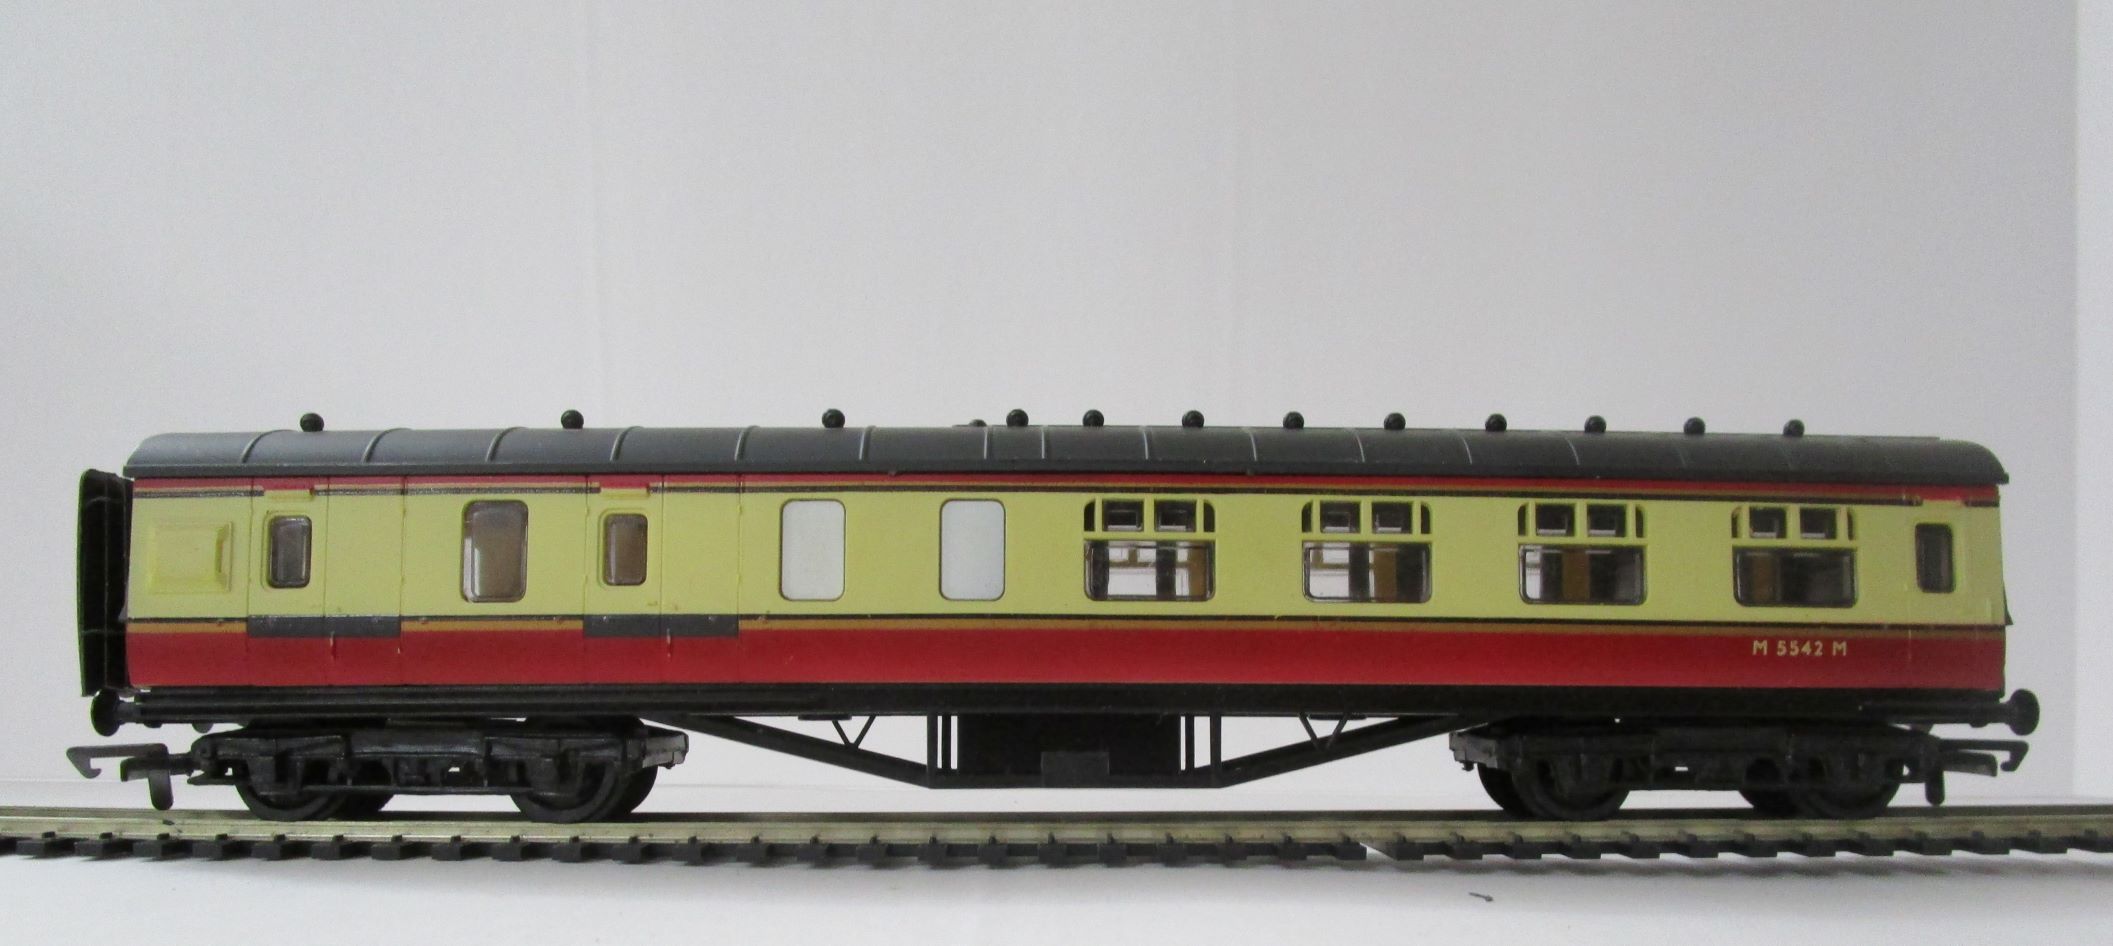 54205-0-SD01 AIRFIX 57ft  Brake 3rd Corridor B.R. M5542M replaced couplings and corridor ends - BOXED